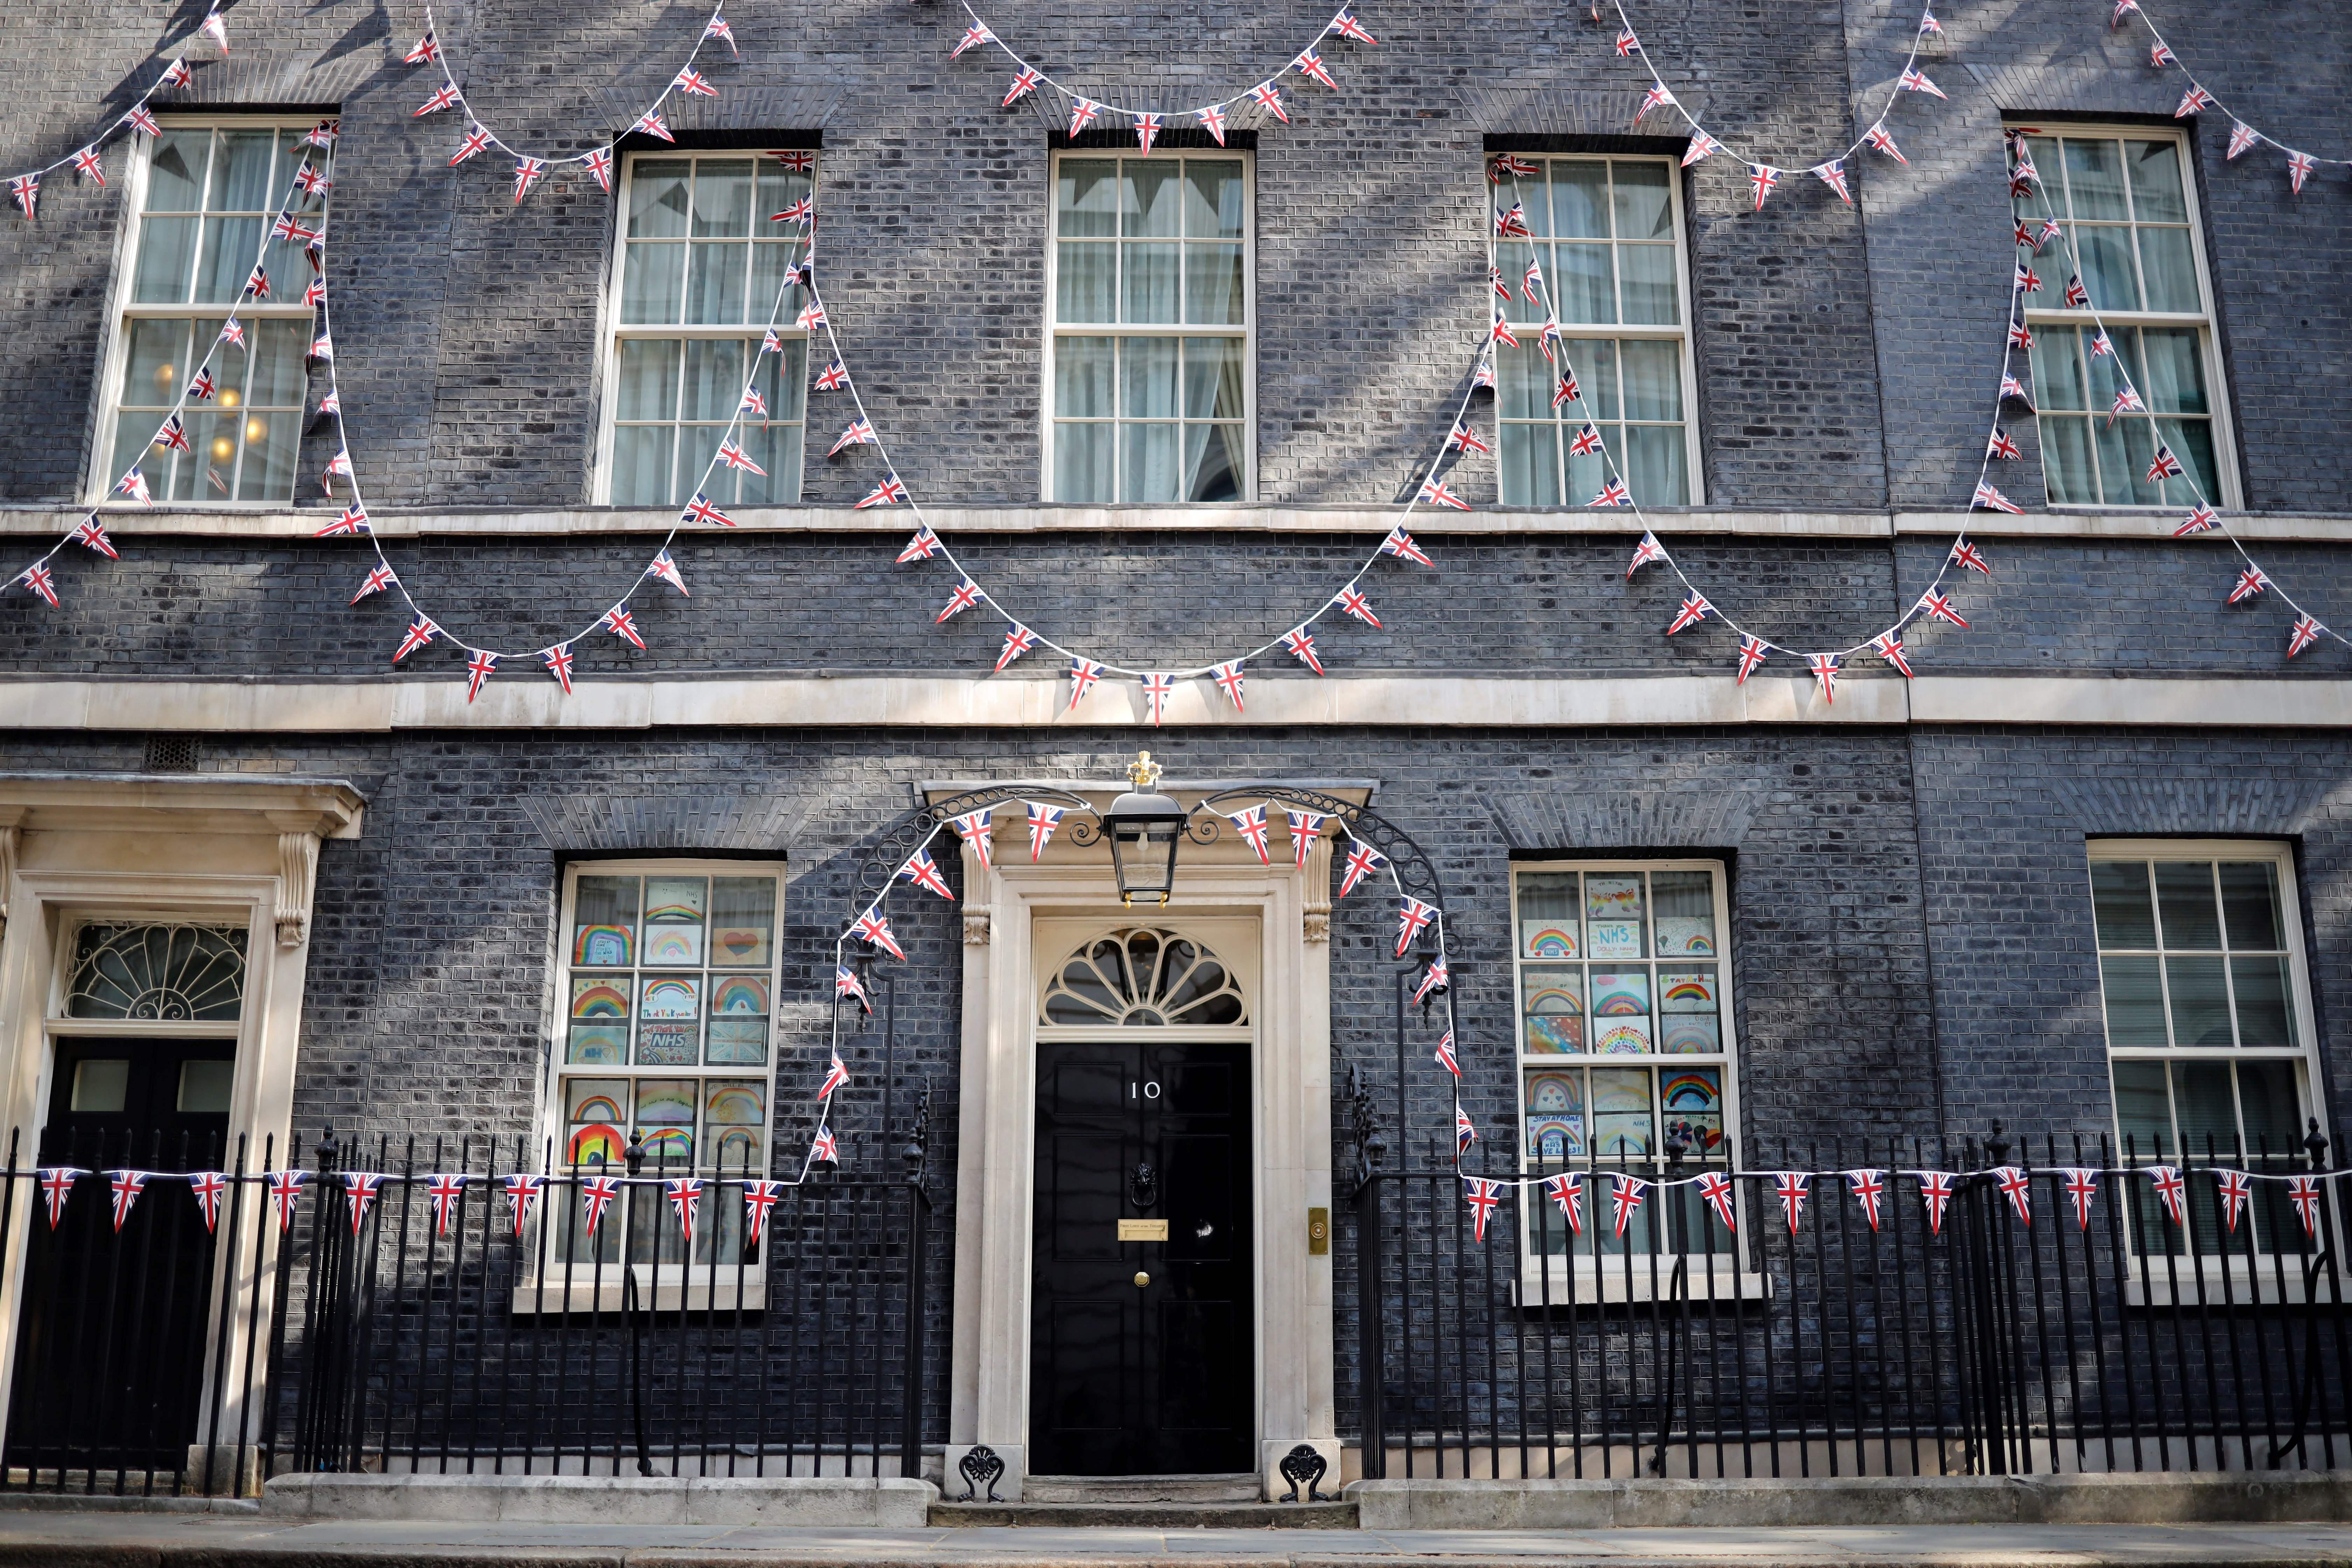 Bunting covers the facade of Downing street